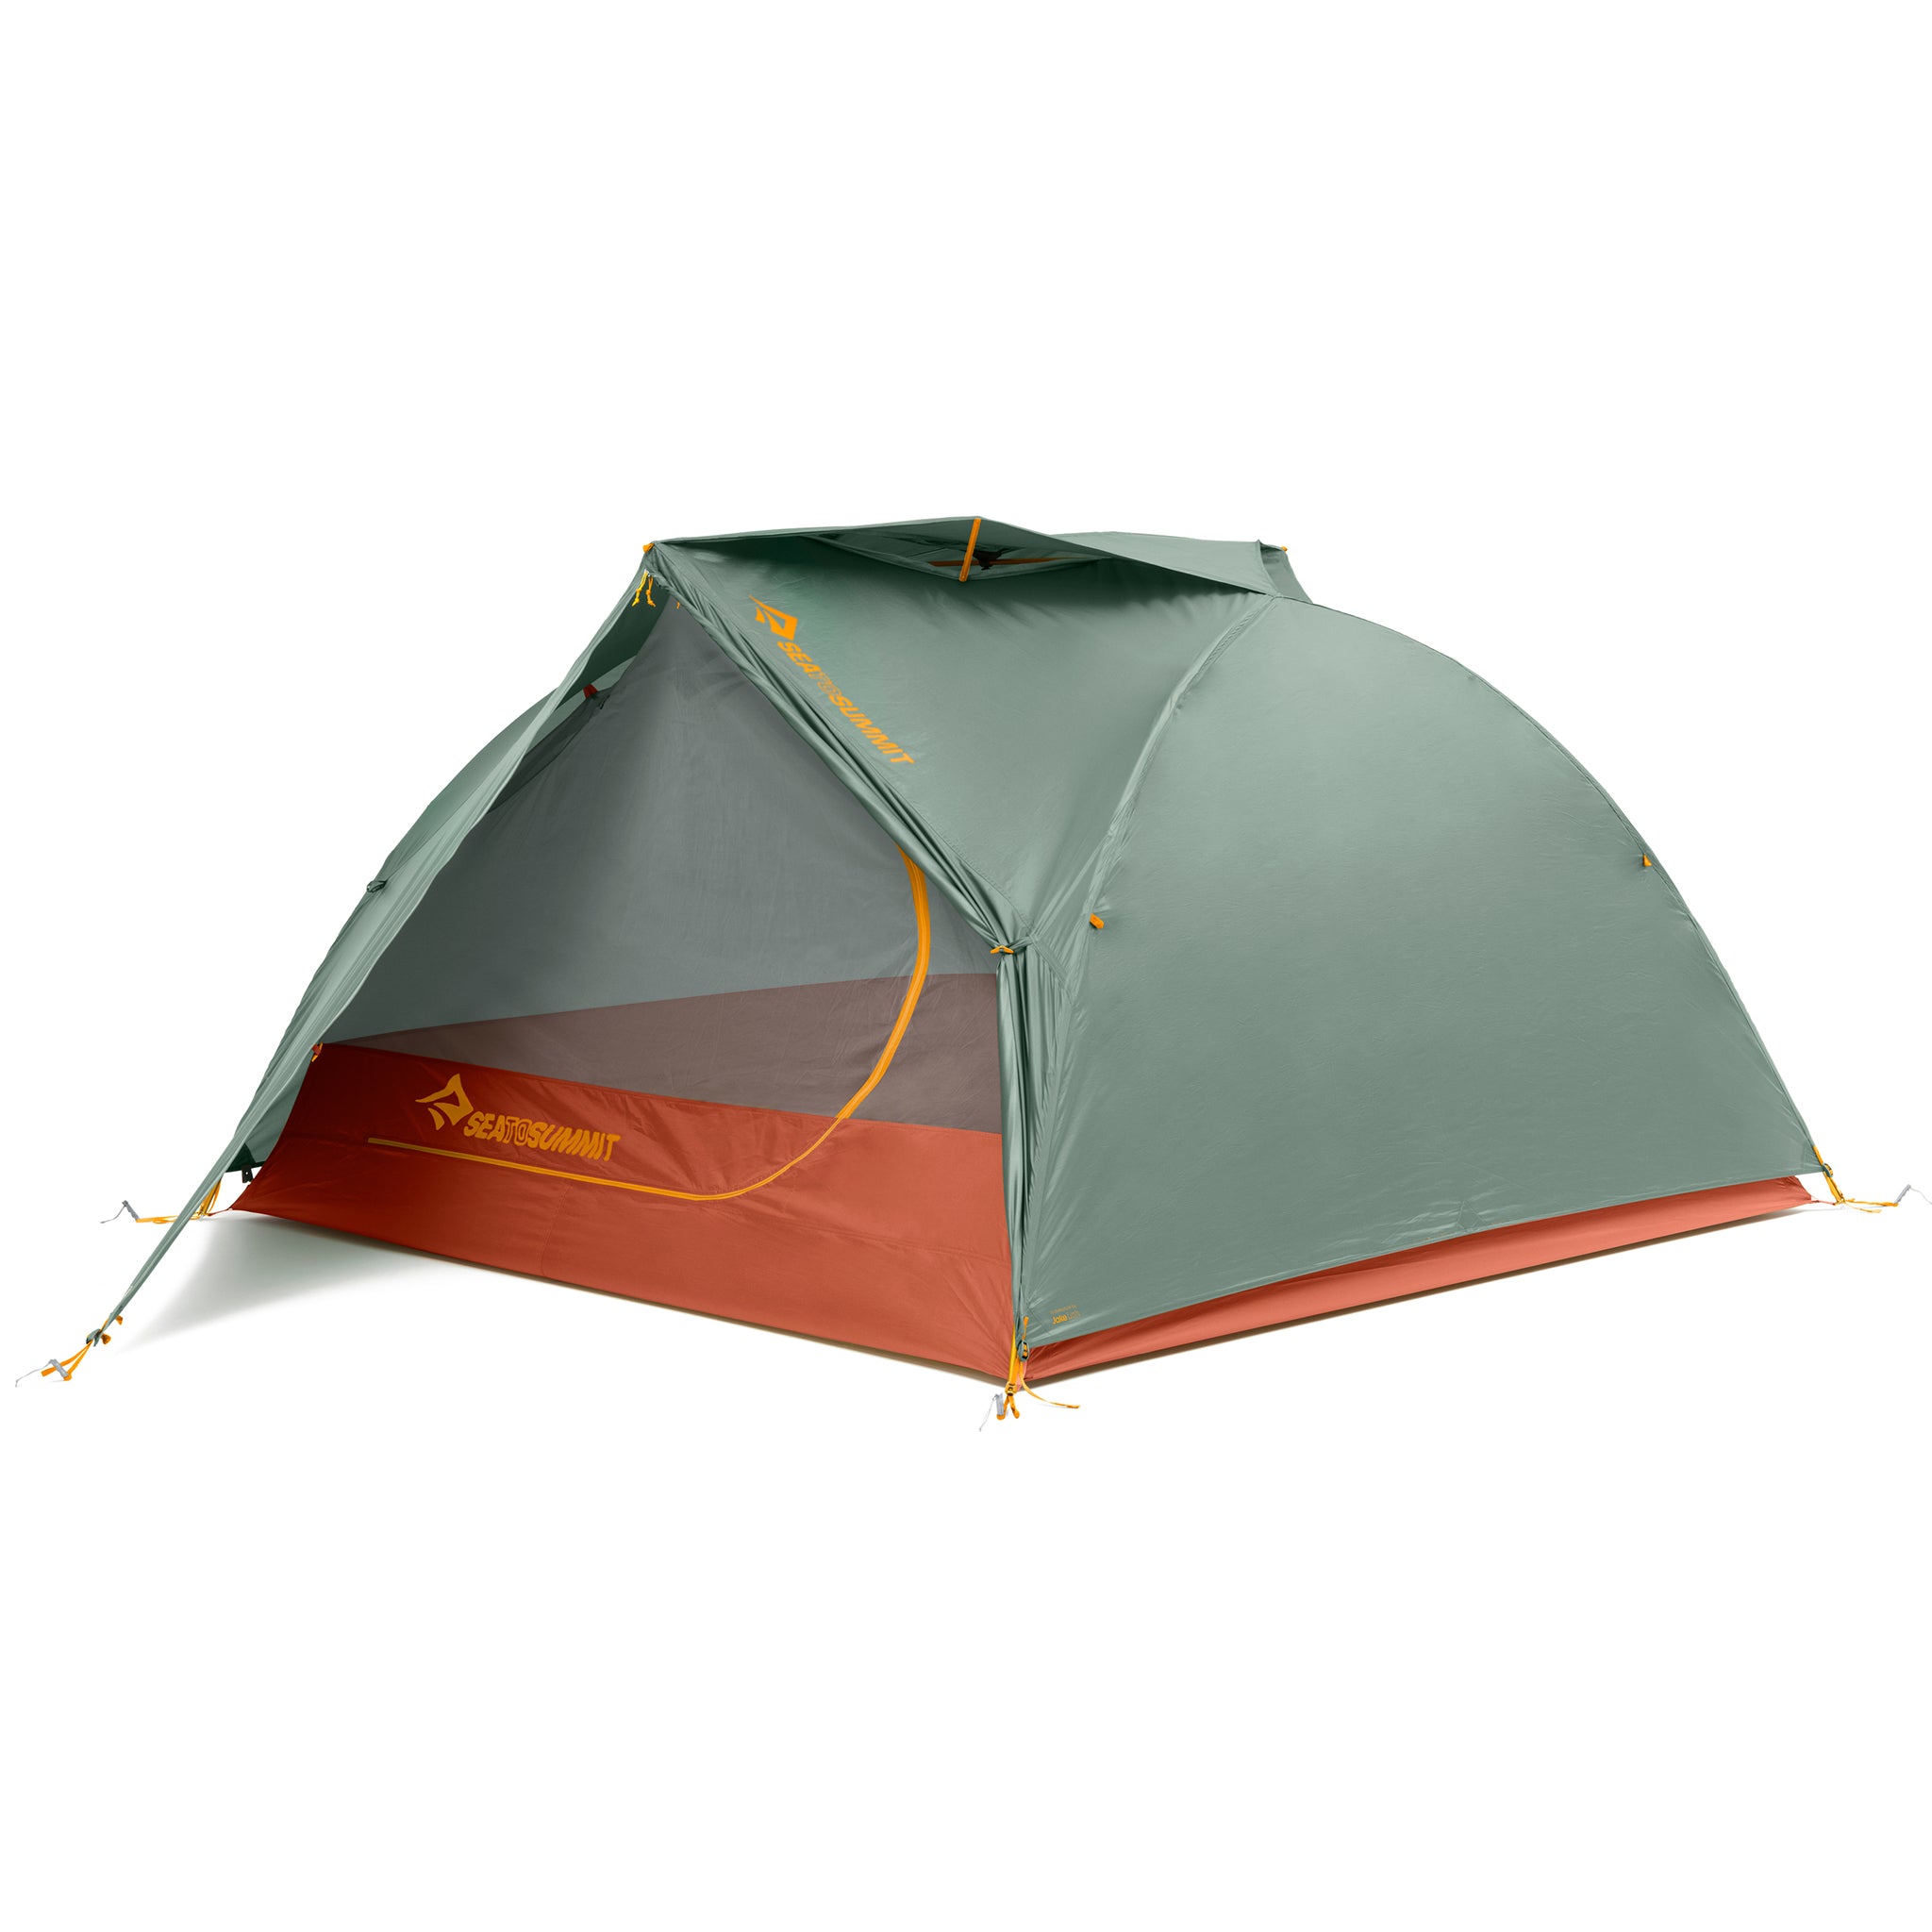 Ikos TR3 Tent for Backpacking